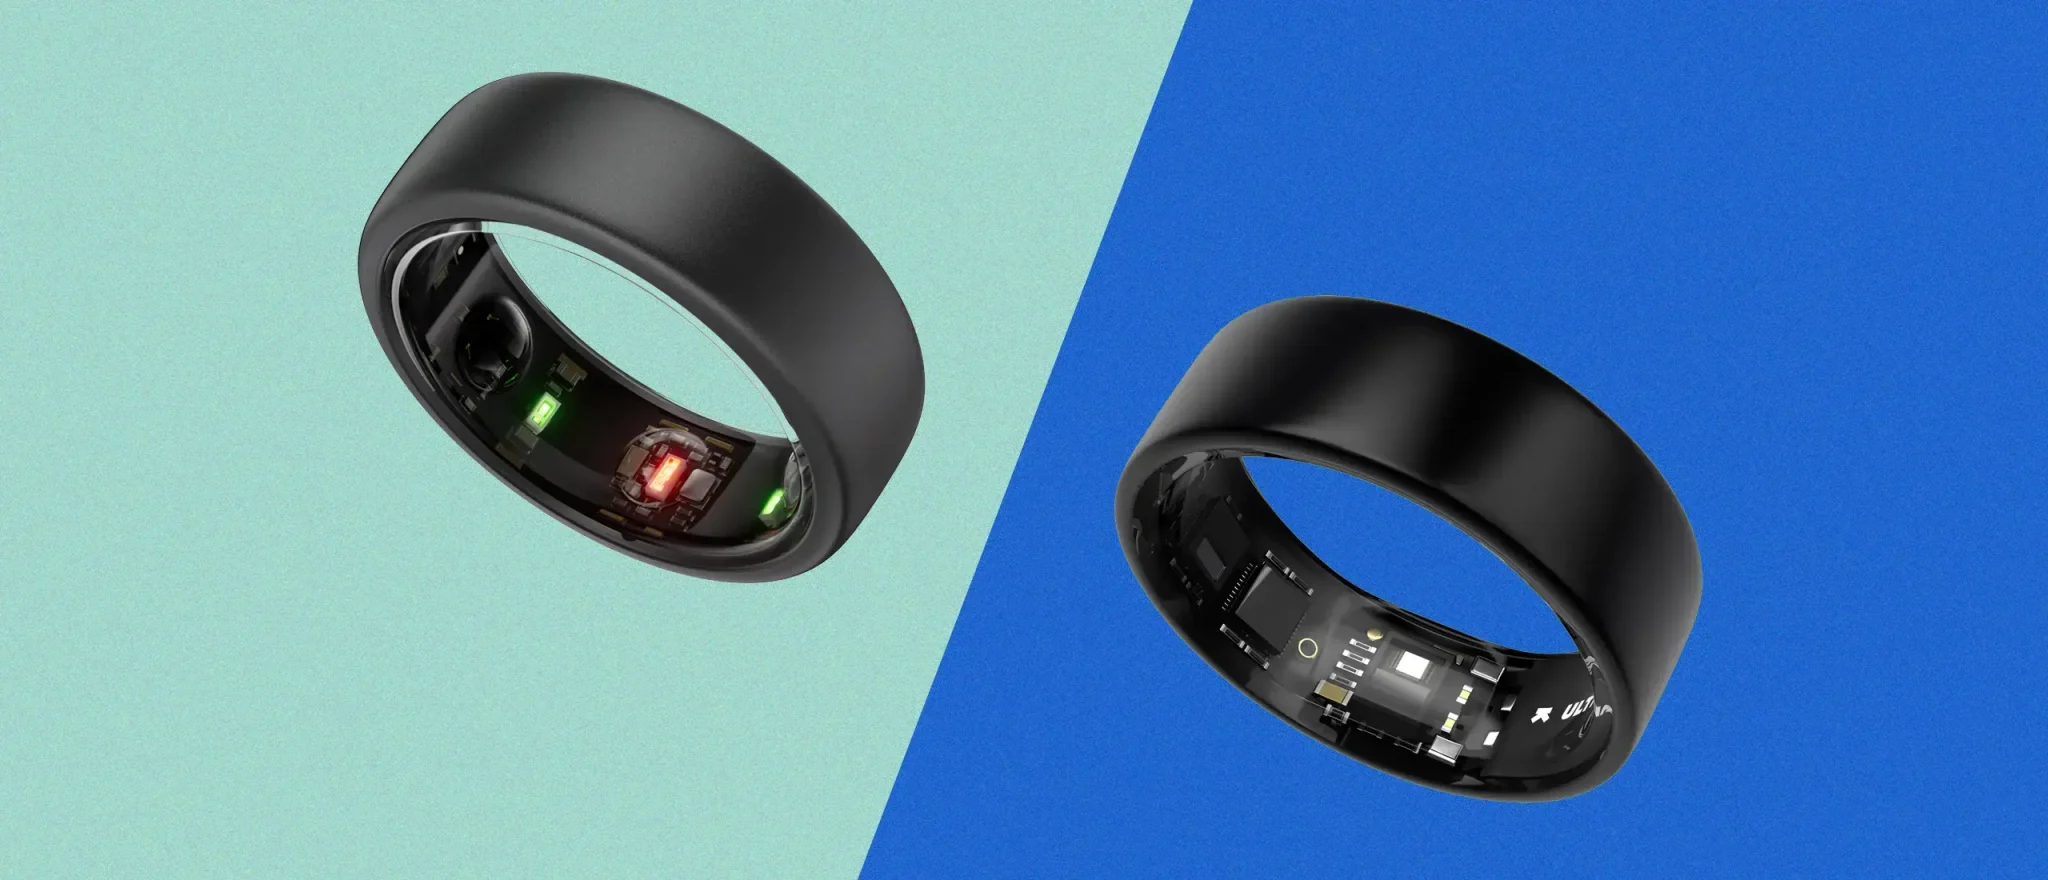 Oura Ring vs. Ultrahuman: Which Is Better?